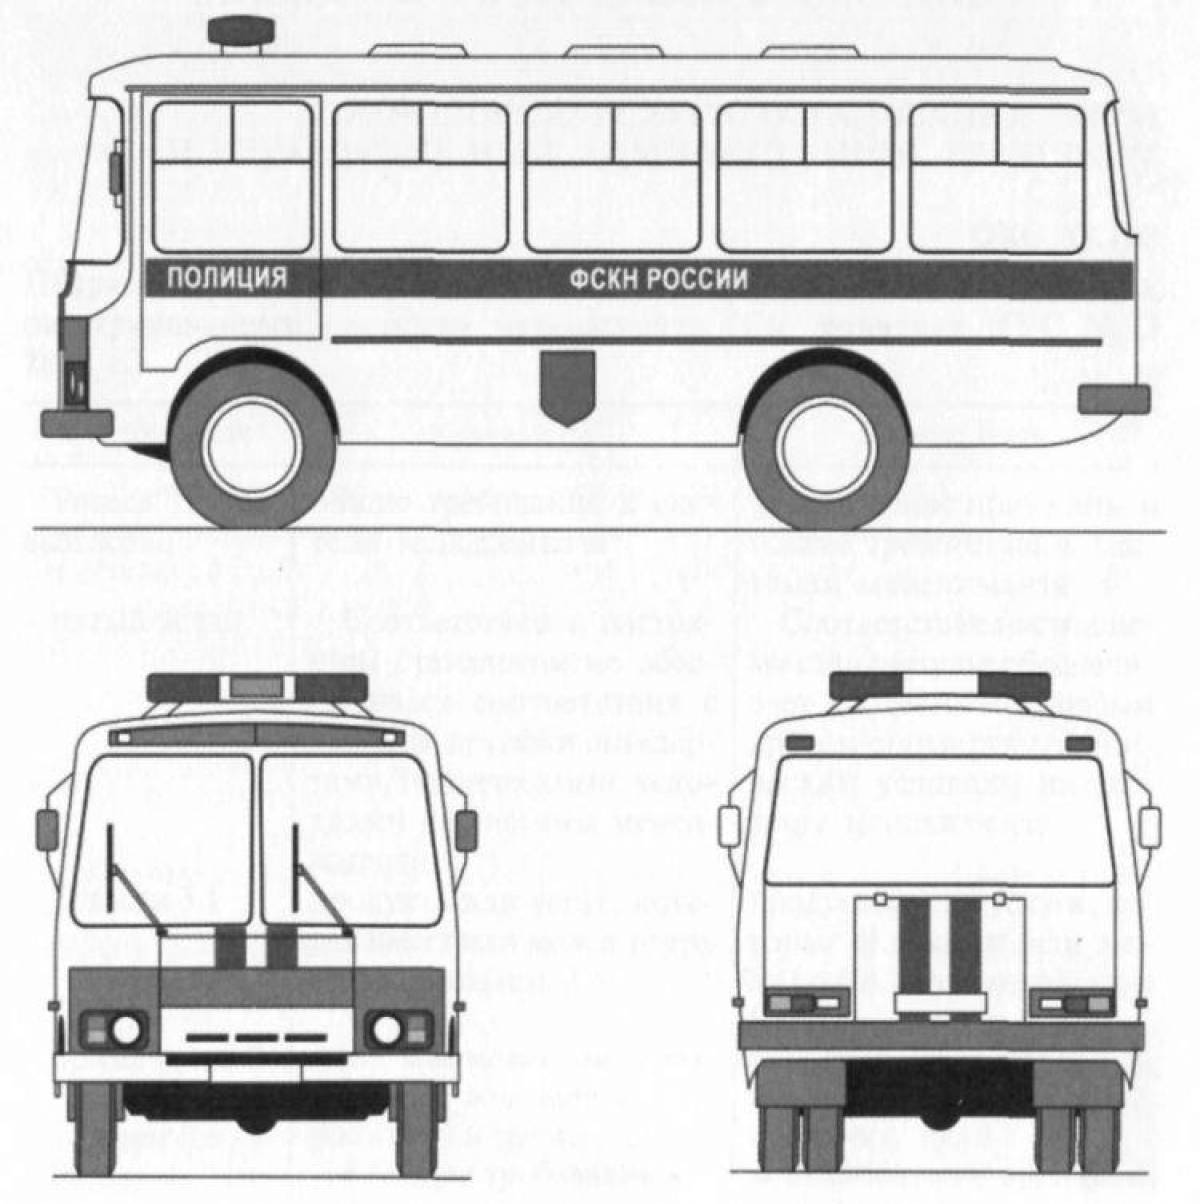 Exciting coloring of the police bus